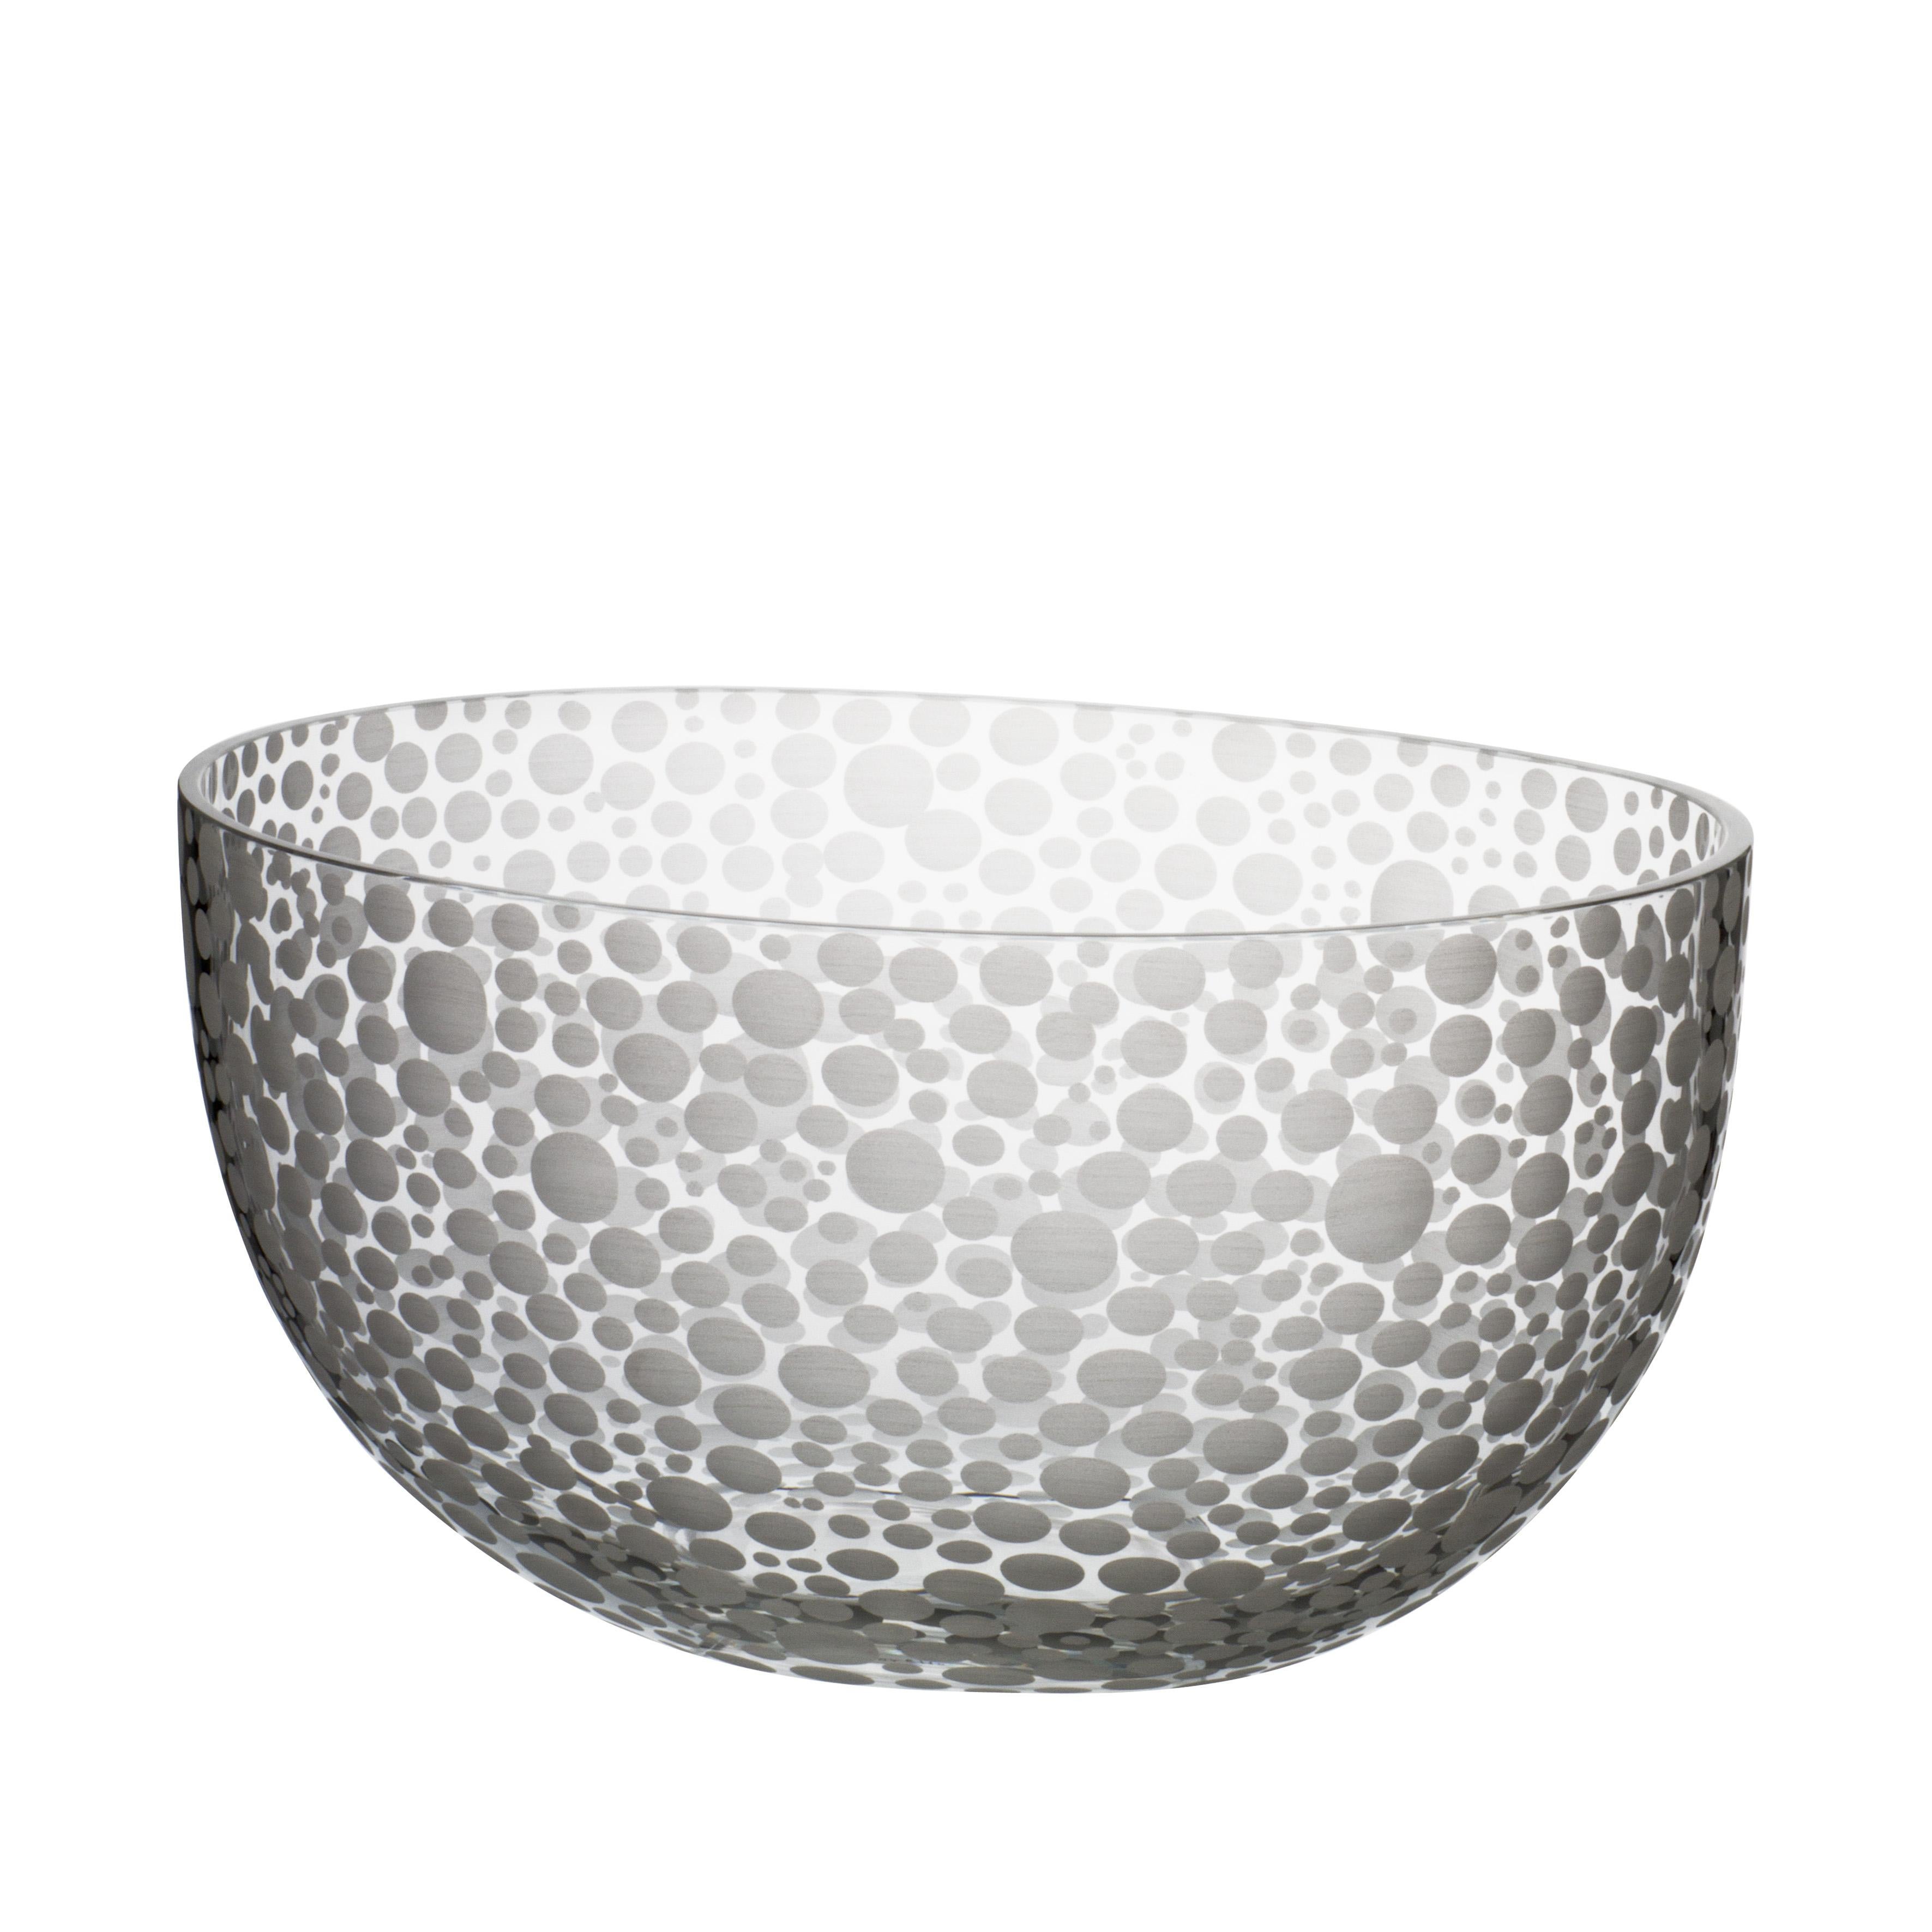 Millebolle Bowl with Spotted White Detail by Carlo Moretti For Sale